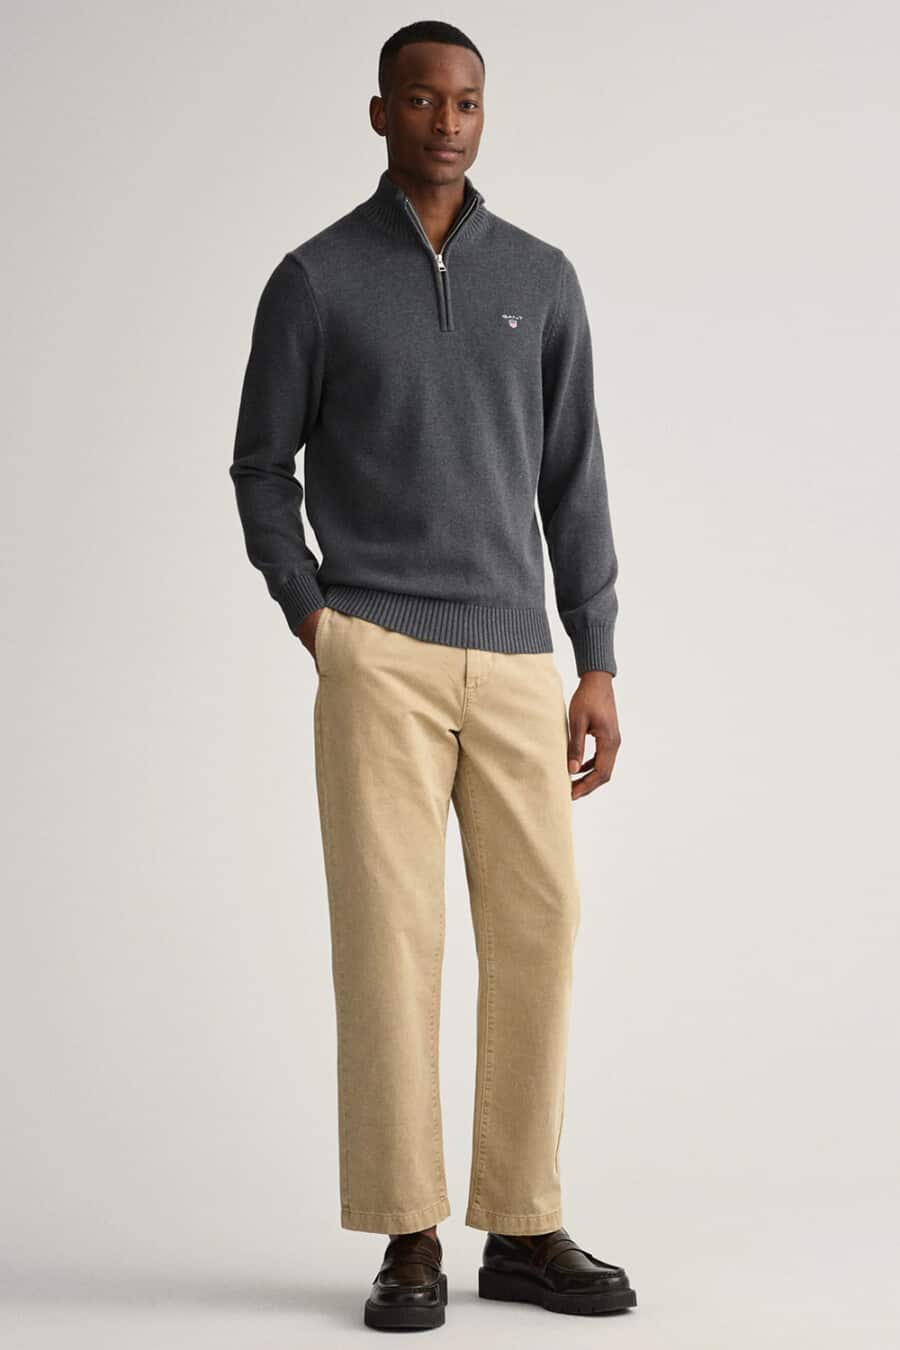 Men's relaxed khaki pants, charcoal quarter-zip sweater and chunky loafers outfit